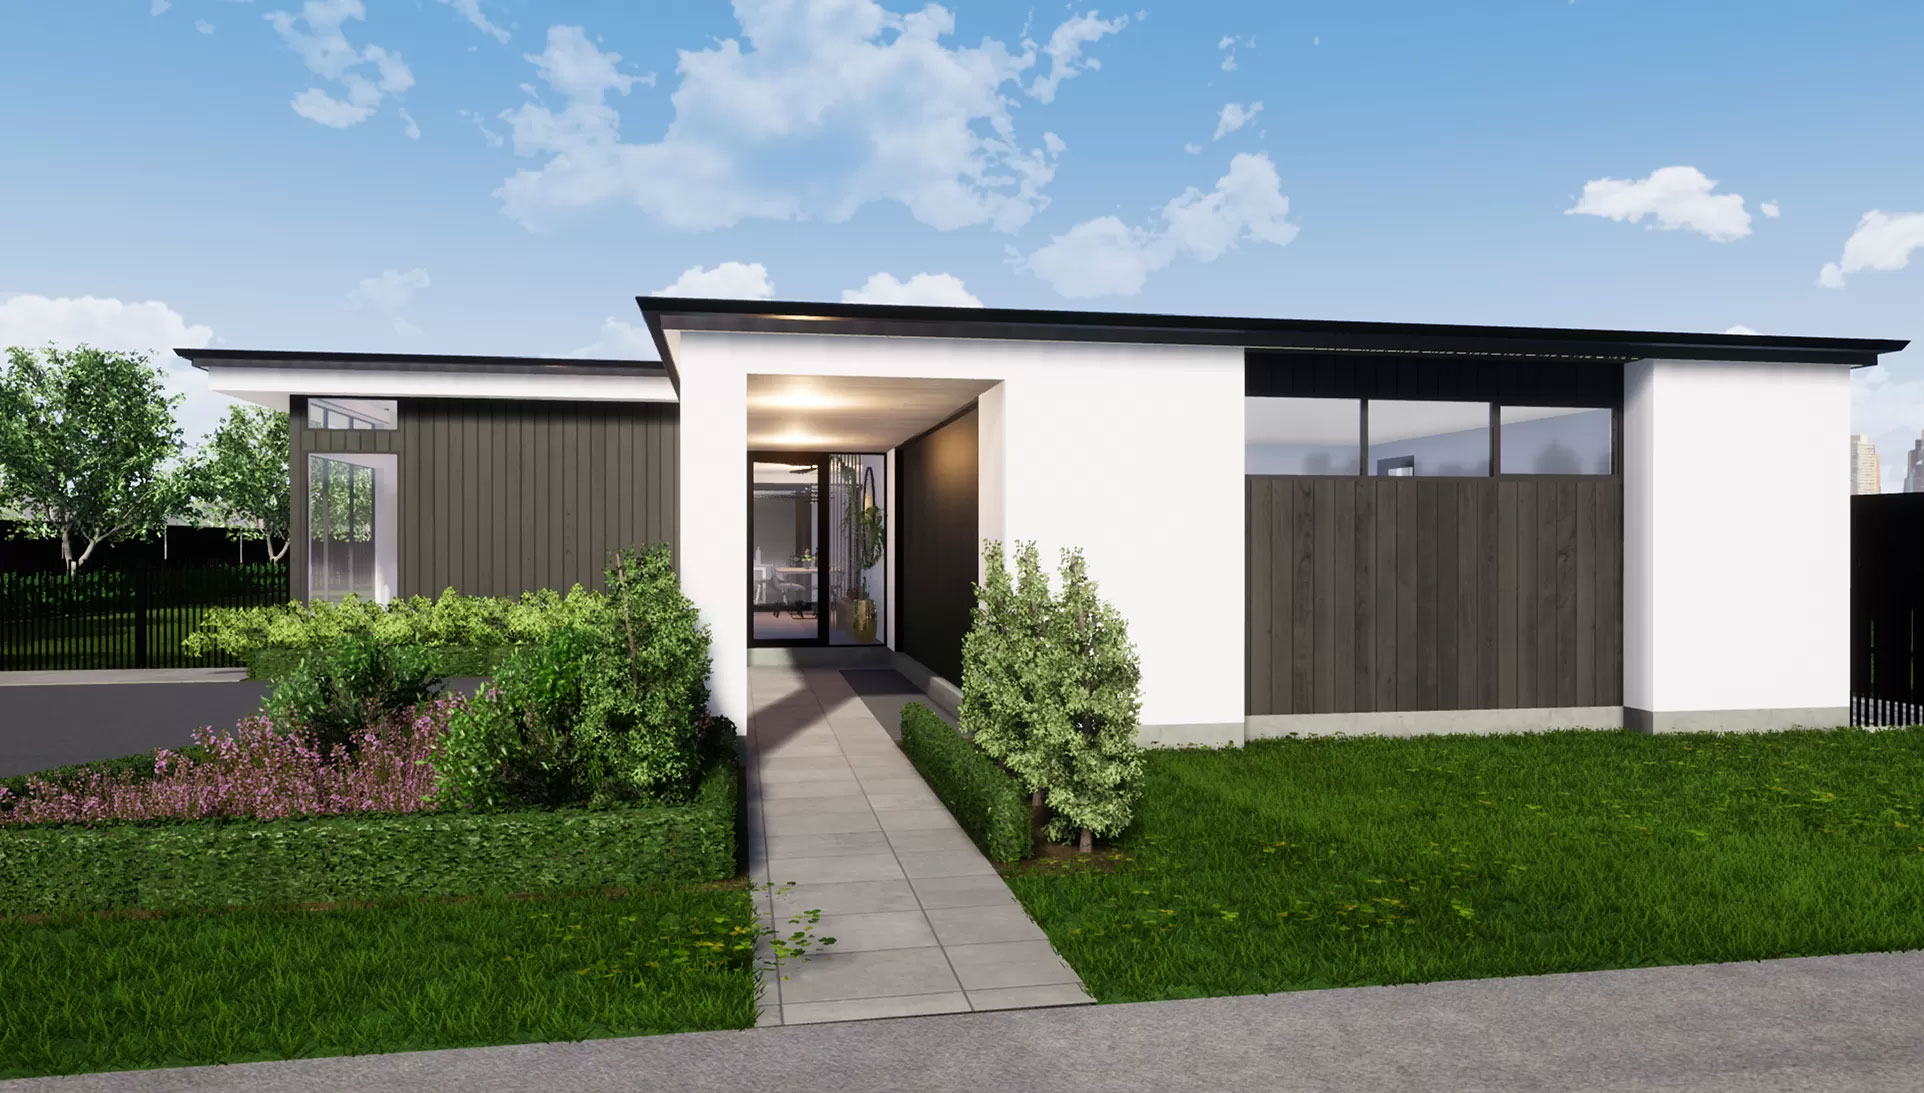 Geraldine Plan - Hallmark Homes - This efficient versatile home offers open-plan living, a practical scullery, & 4 bedrooms with a master suite for a luxurious touch.